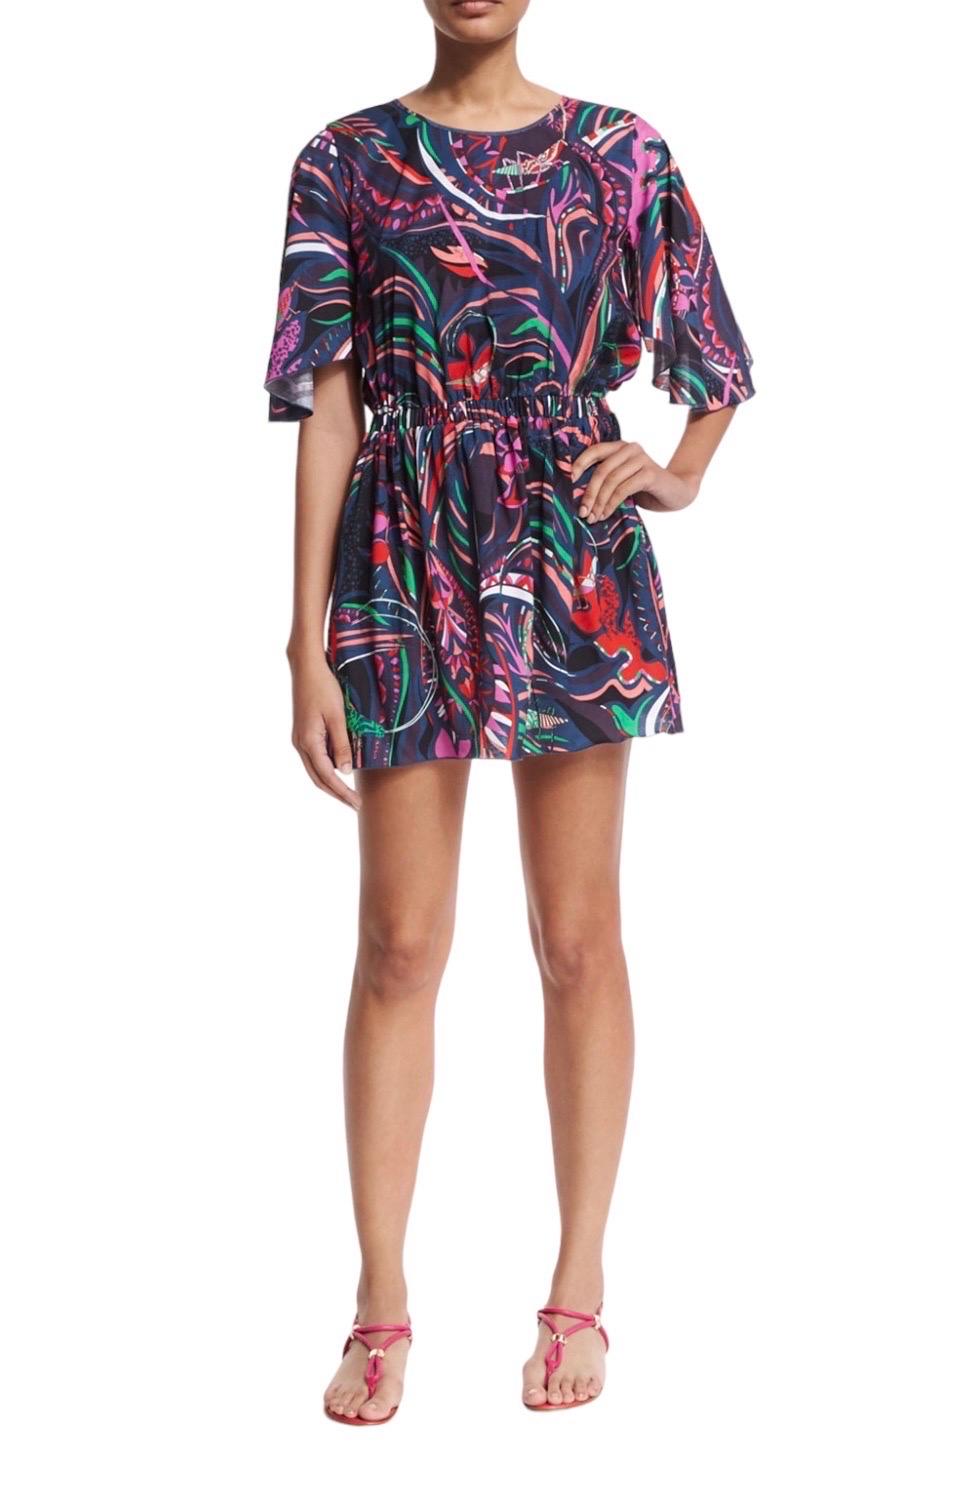    Beautiful EMILIO PUCCI dress
   Signature piece with the timeless EMILIO PUCCI print in stunning colors
Made of finest cotton fabric
 